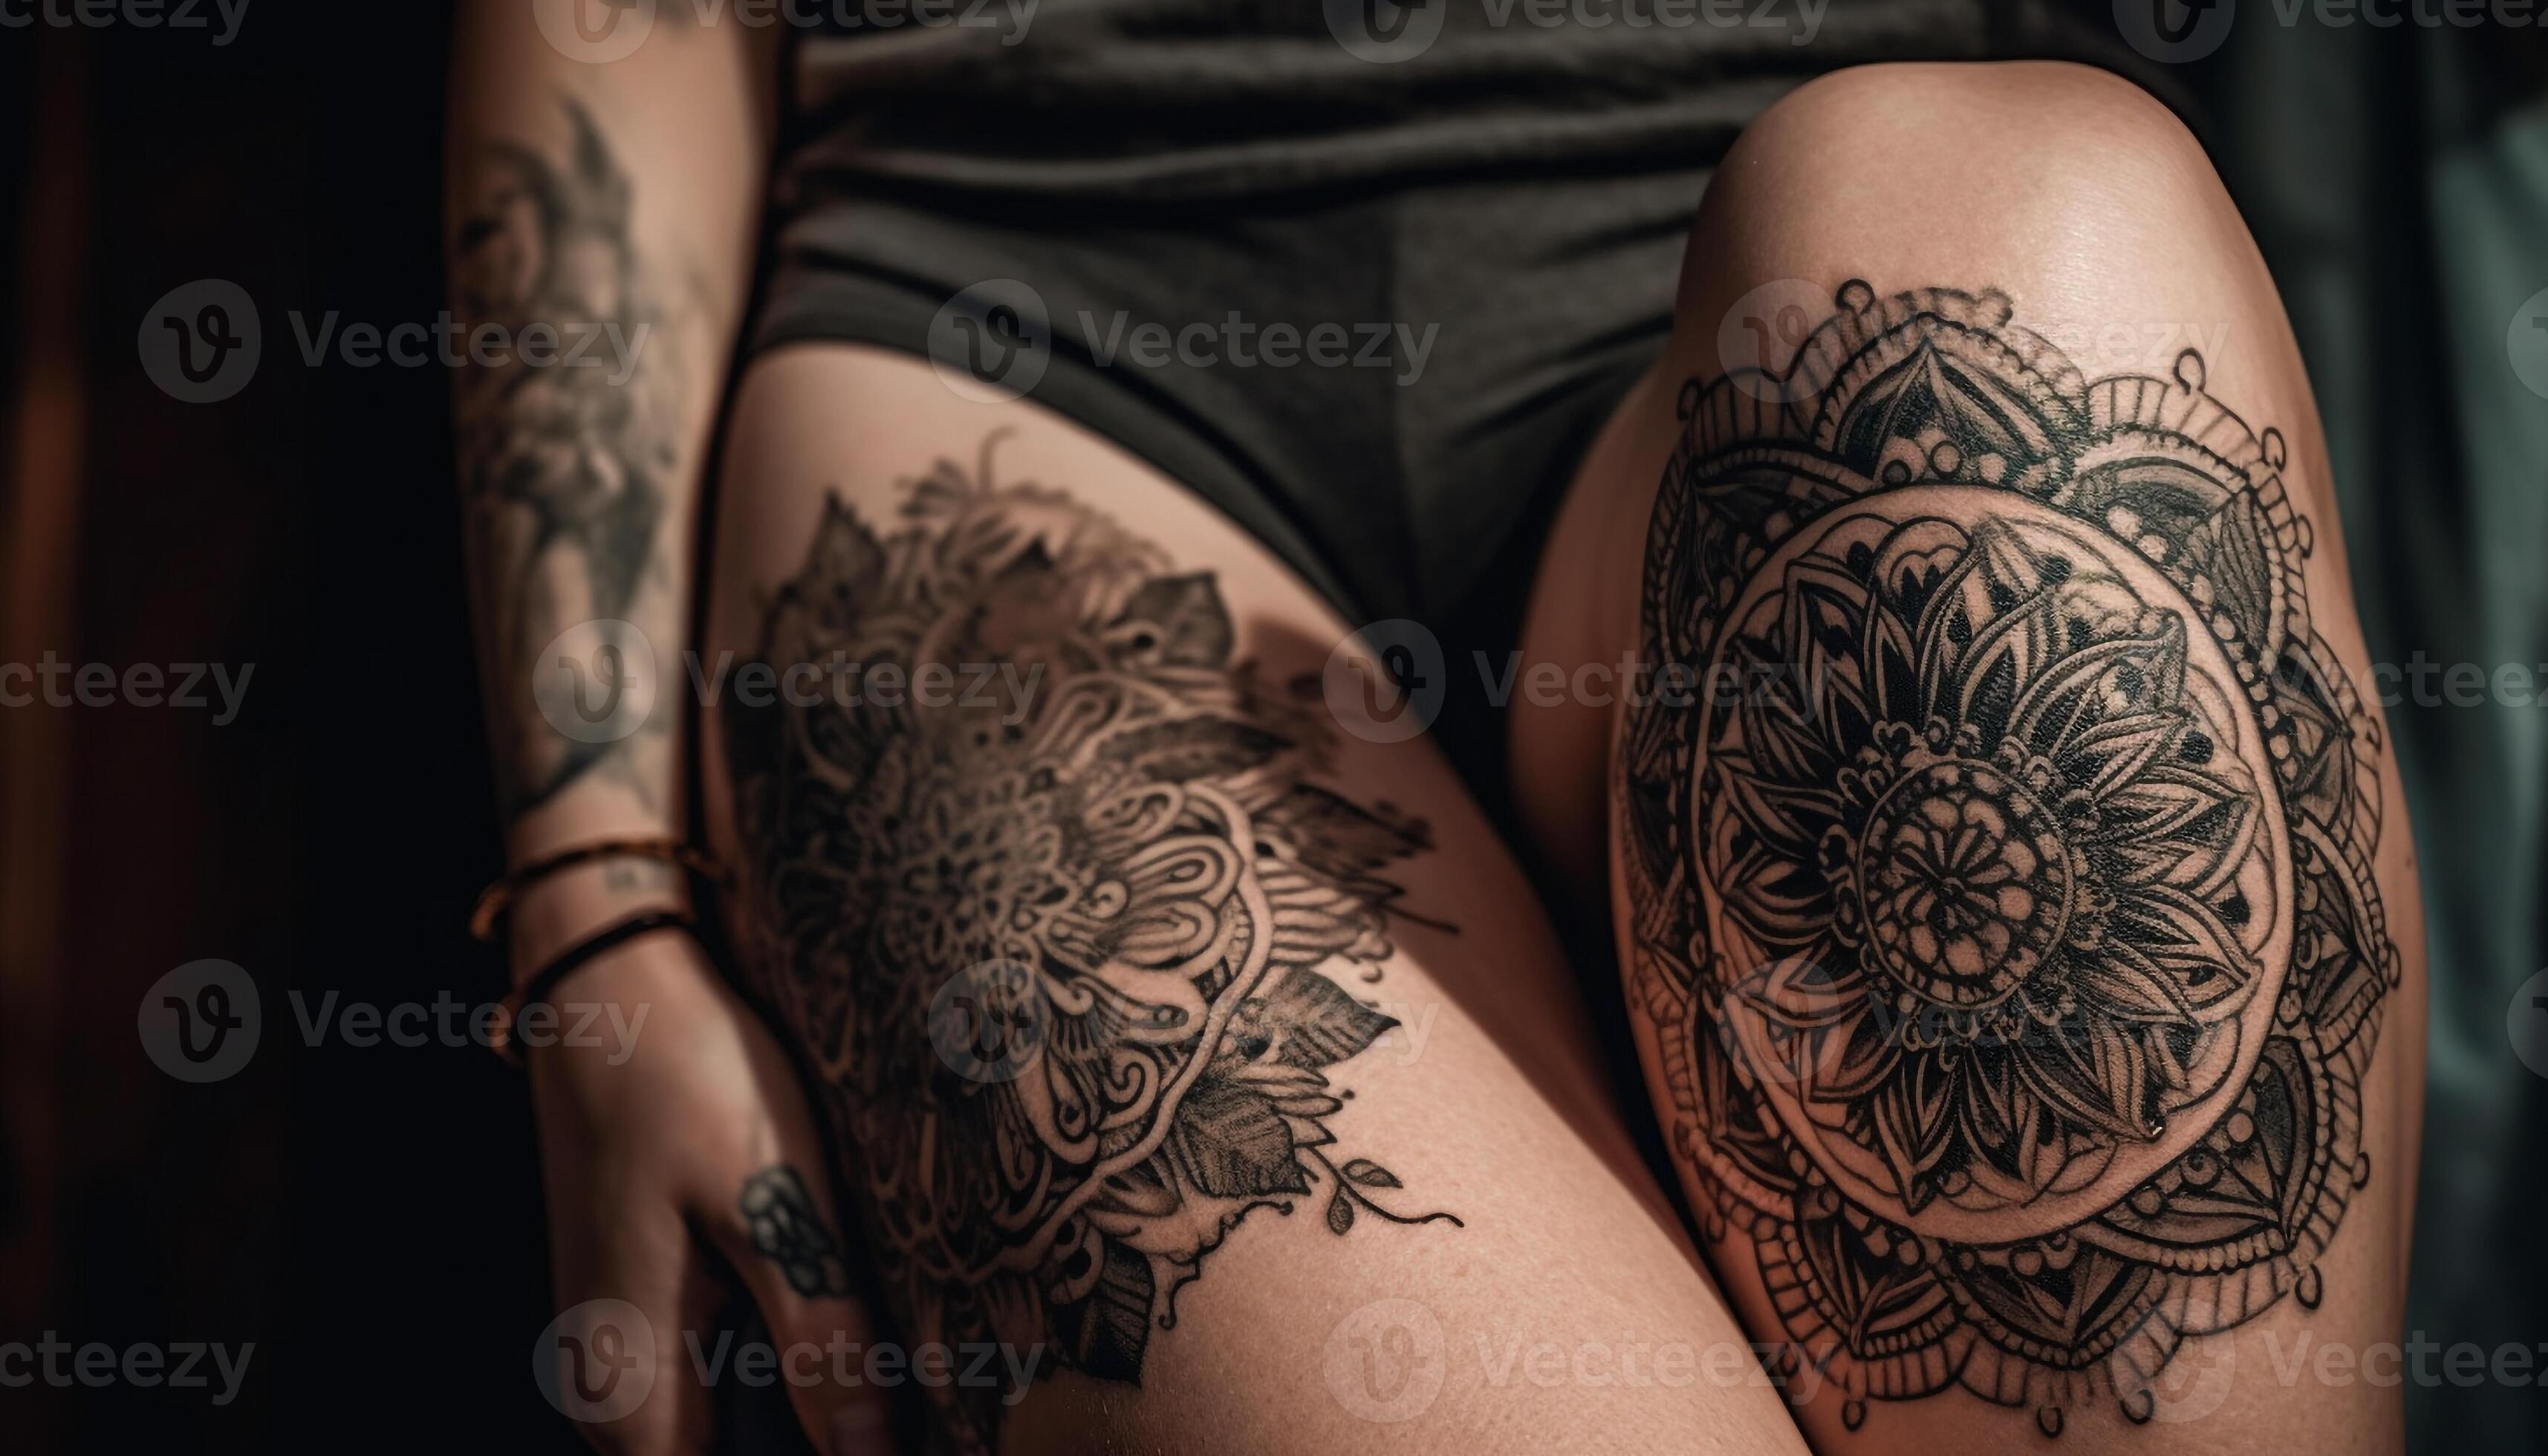 Beautiful Henna Leg Tattoo  I could watch her draw henna like this all day    By LADbible  Facebook